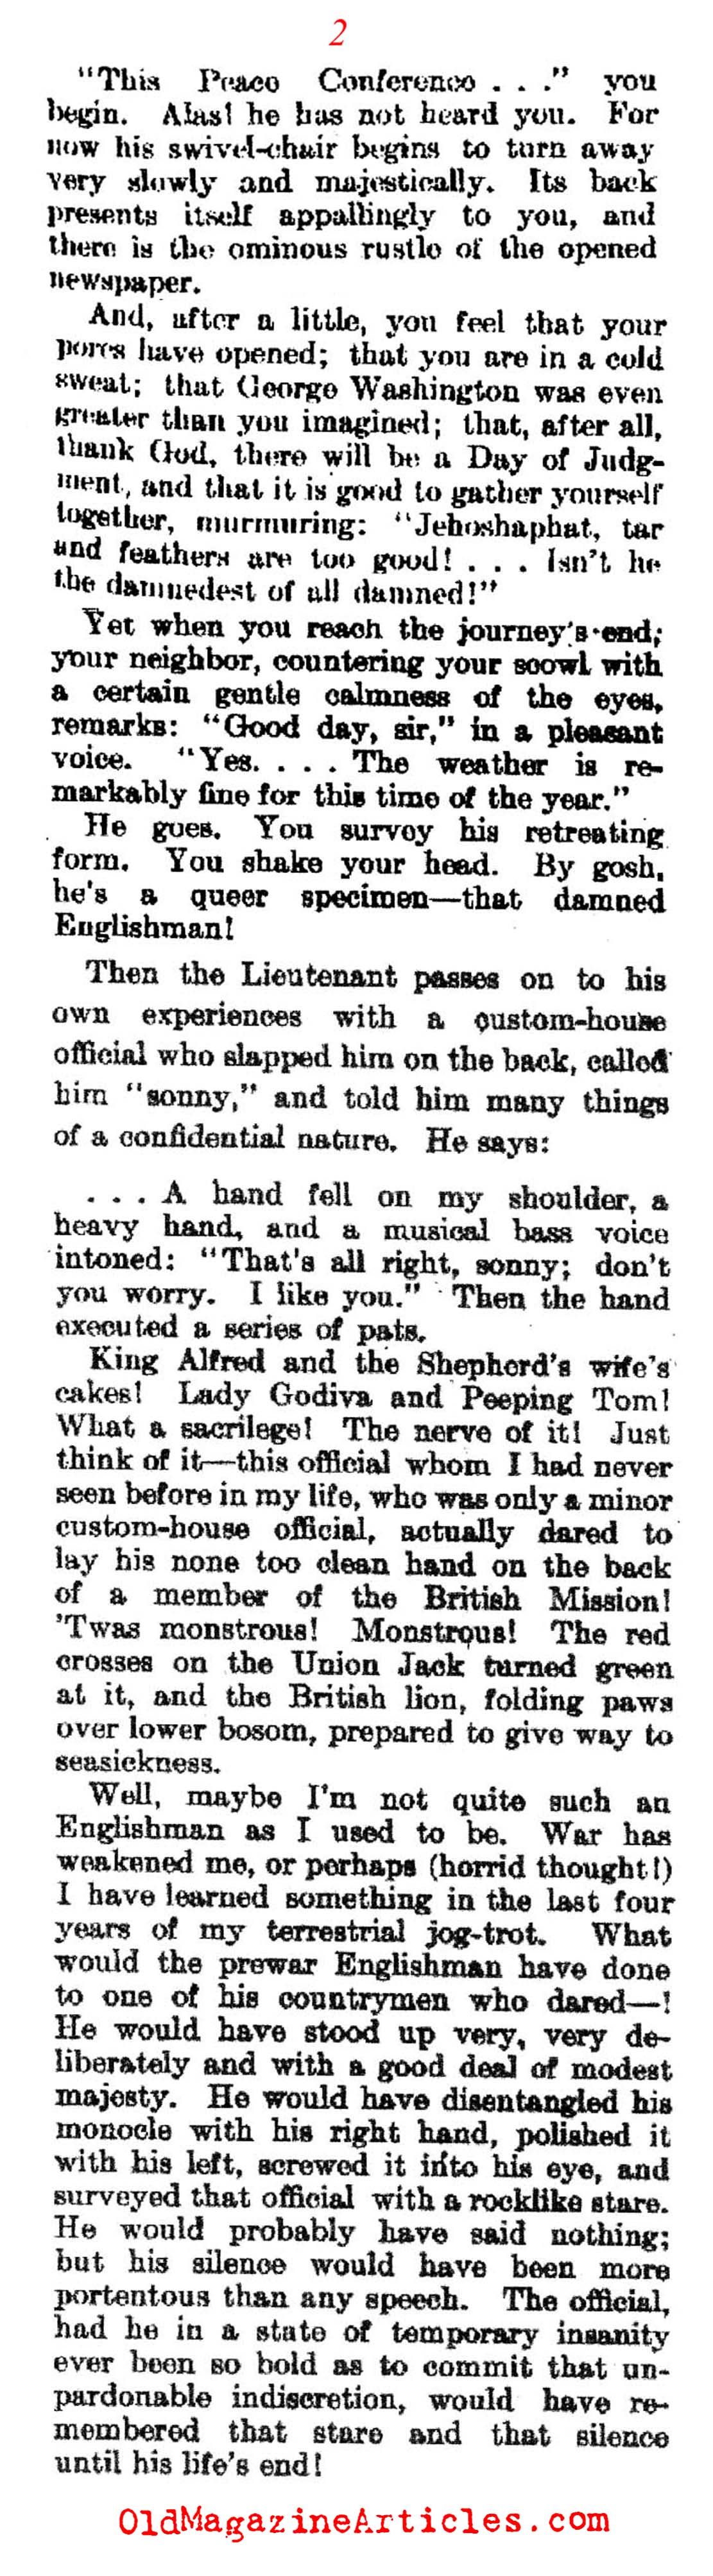 The Difference Between Brits & Yanks (Literary Digest, 1919)